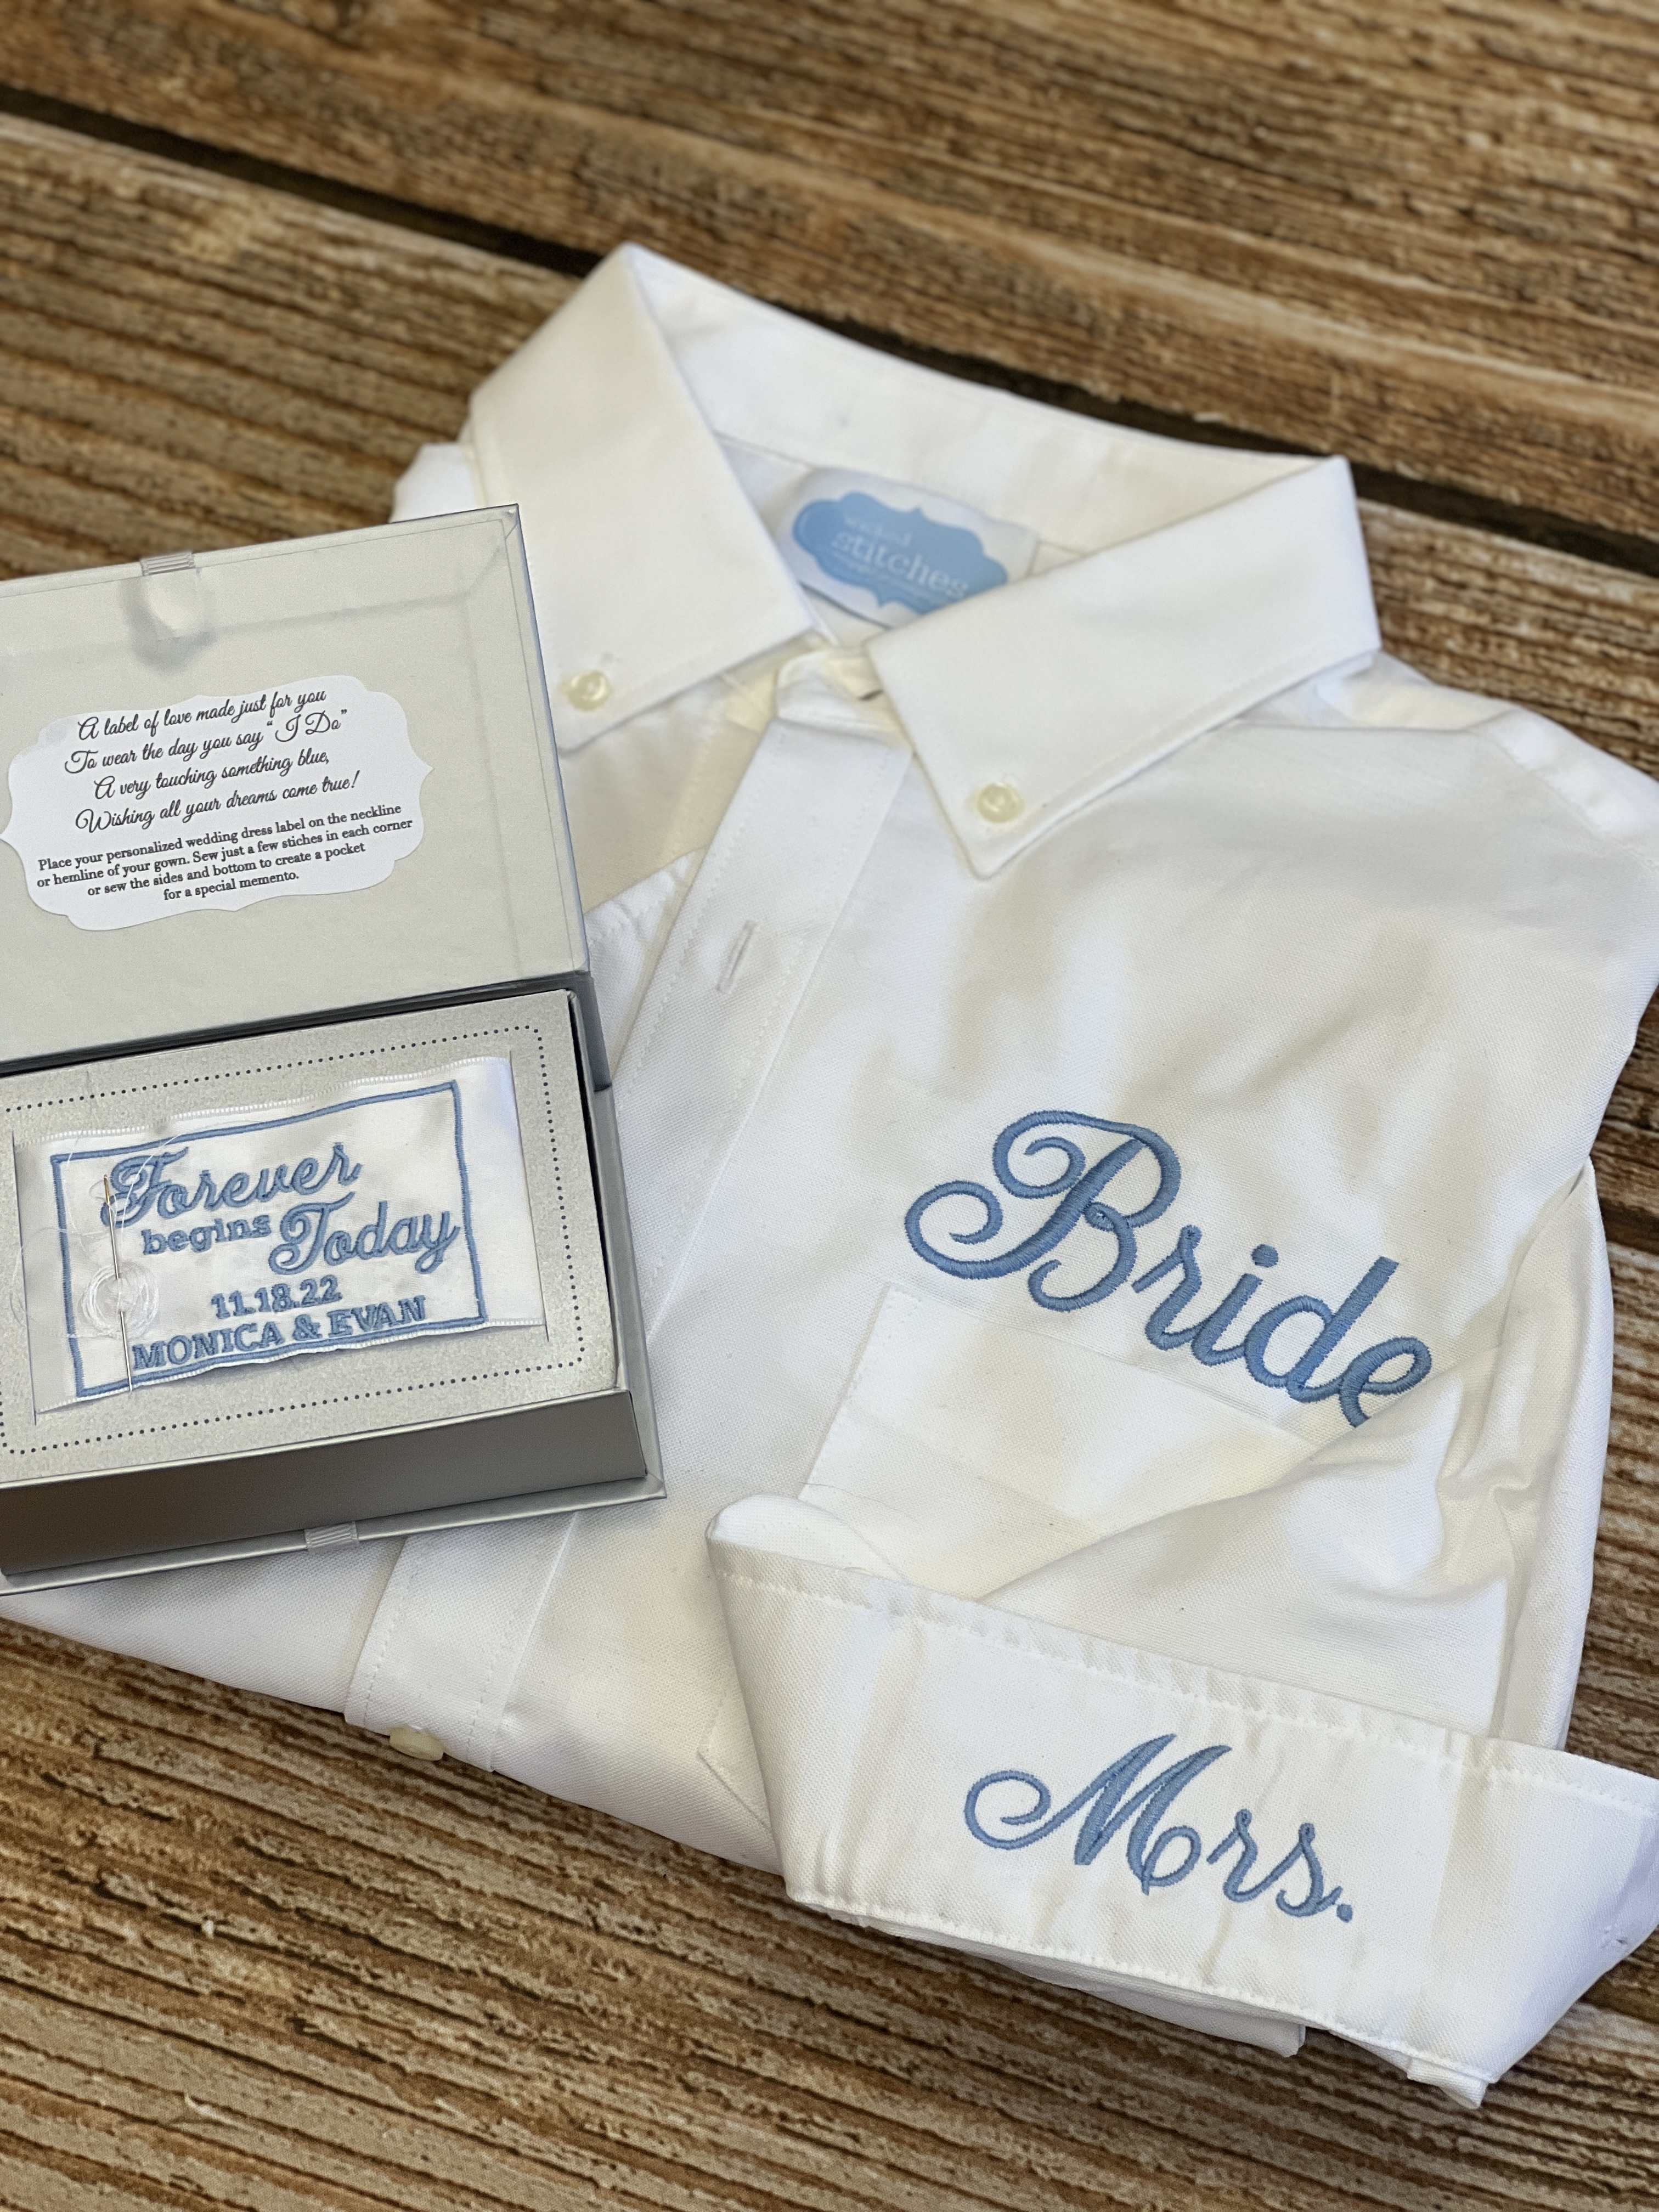 Add a wedding dress label- It's one of our favorite gift combinations at Wicked Stitches Gifts.